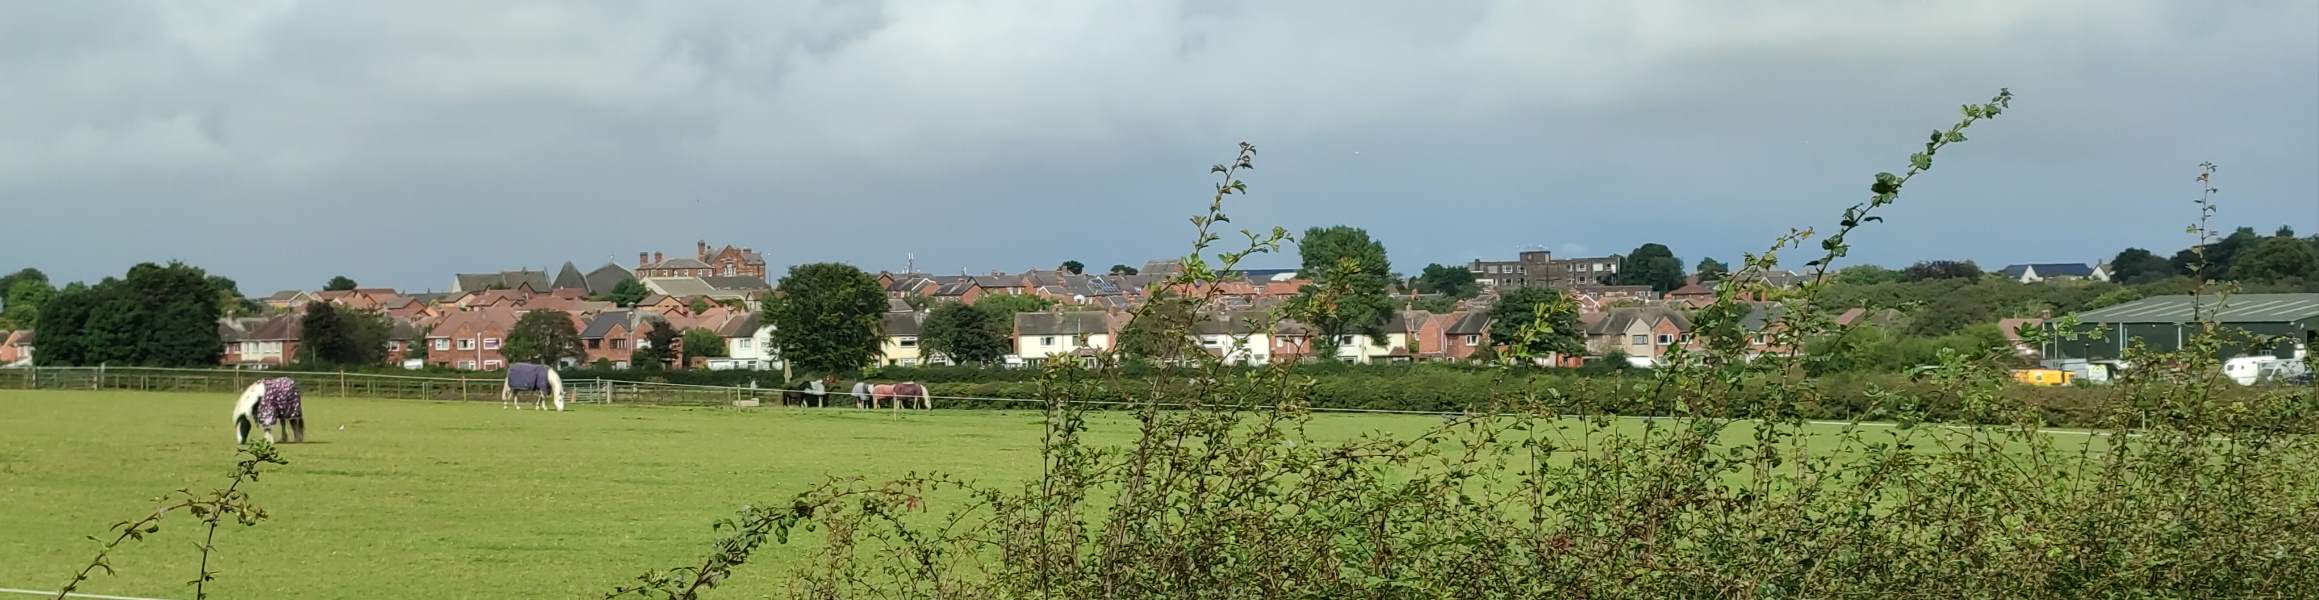 Suburban buildings rise from above a farm full of horses, including a pub and a block of flats.